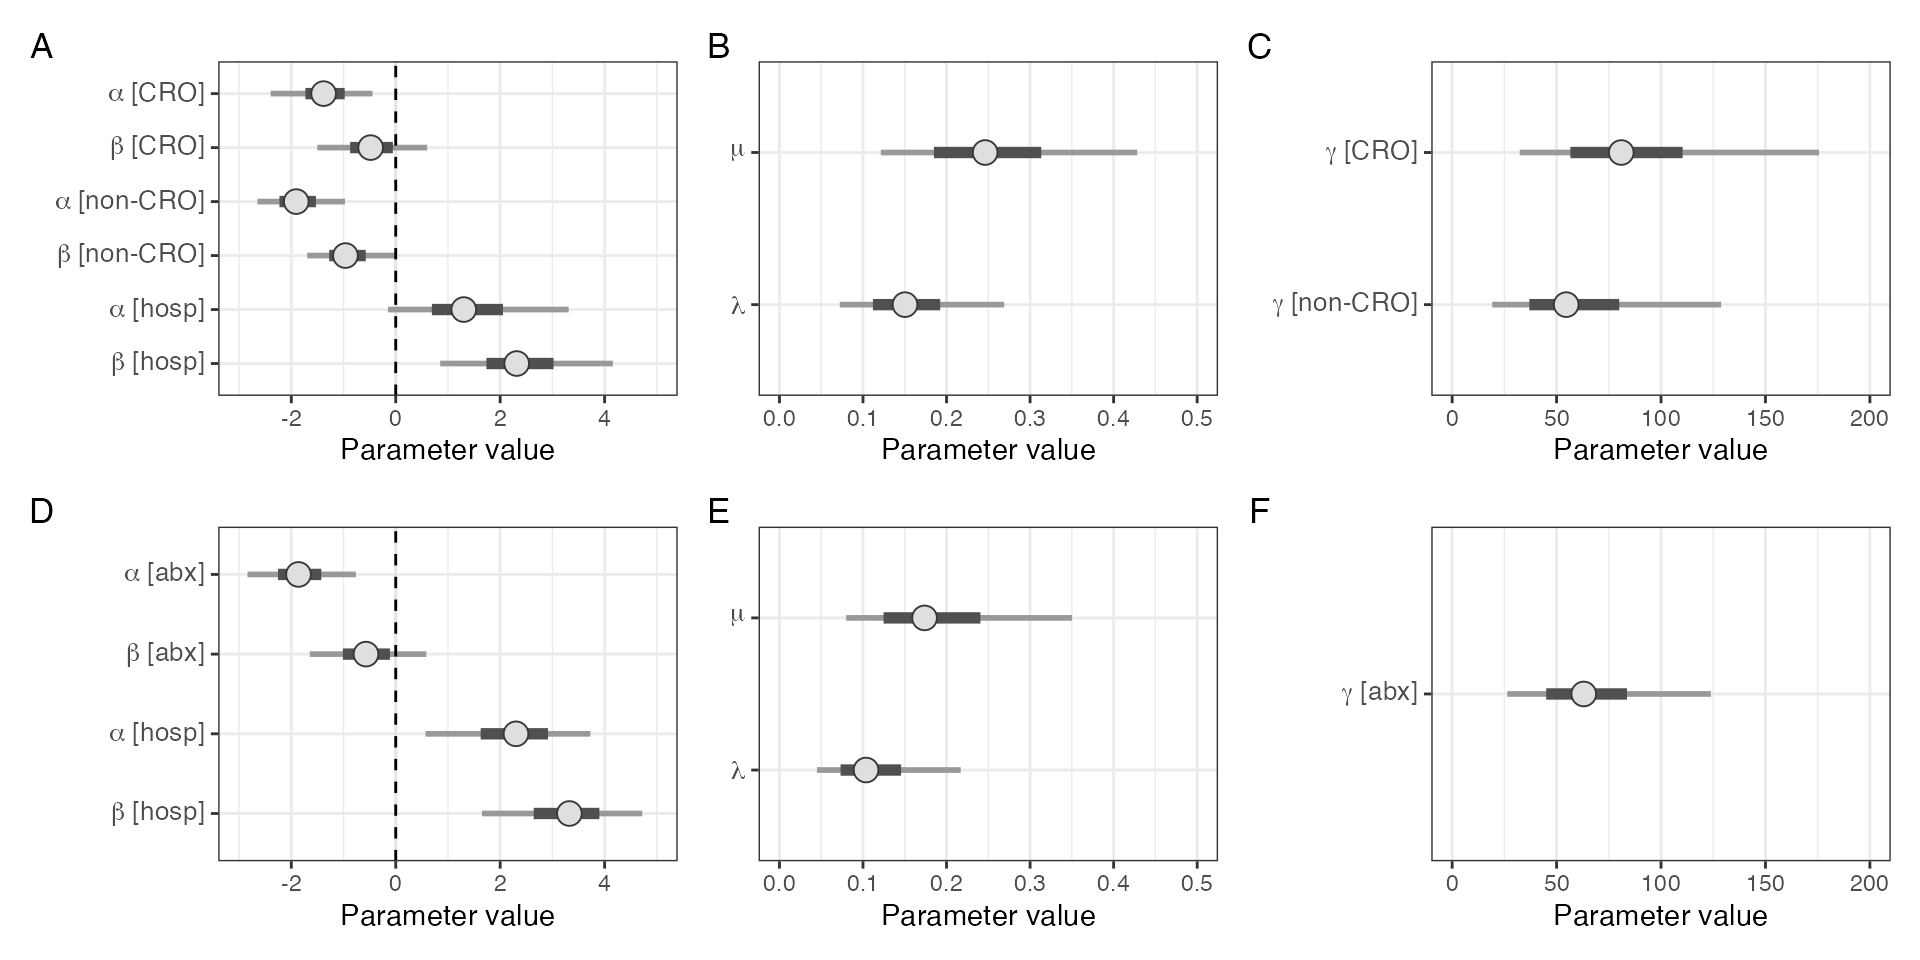 Parameter estimates from model considering ceftriaxone (CRO) exposure seperately to all other antimicrobials (A-C) versus all antimicrobials together (D-F).